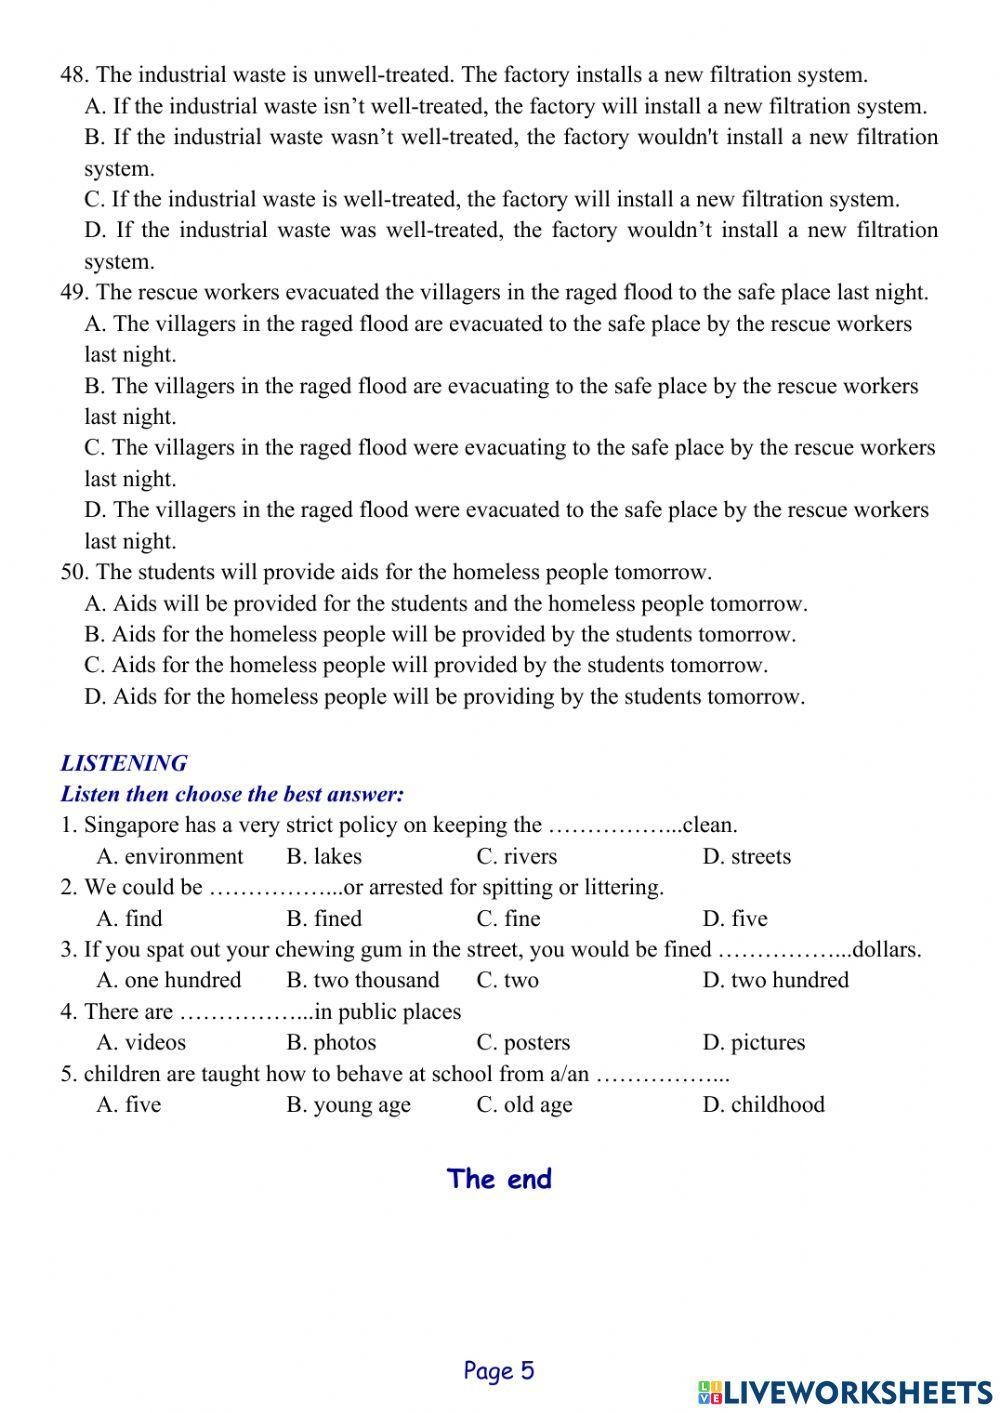 Tieng Anh Lop 8 - 2nd Mid-Term Test 04